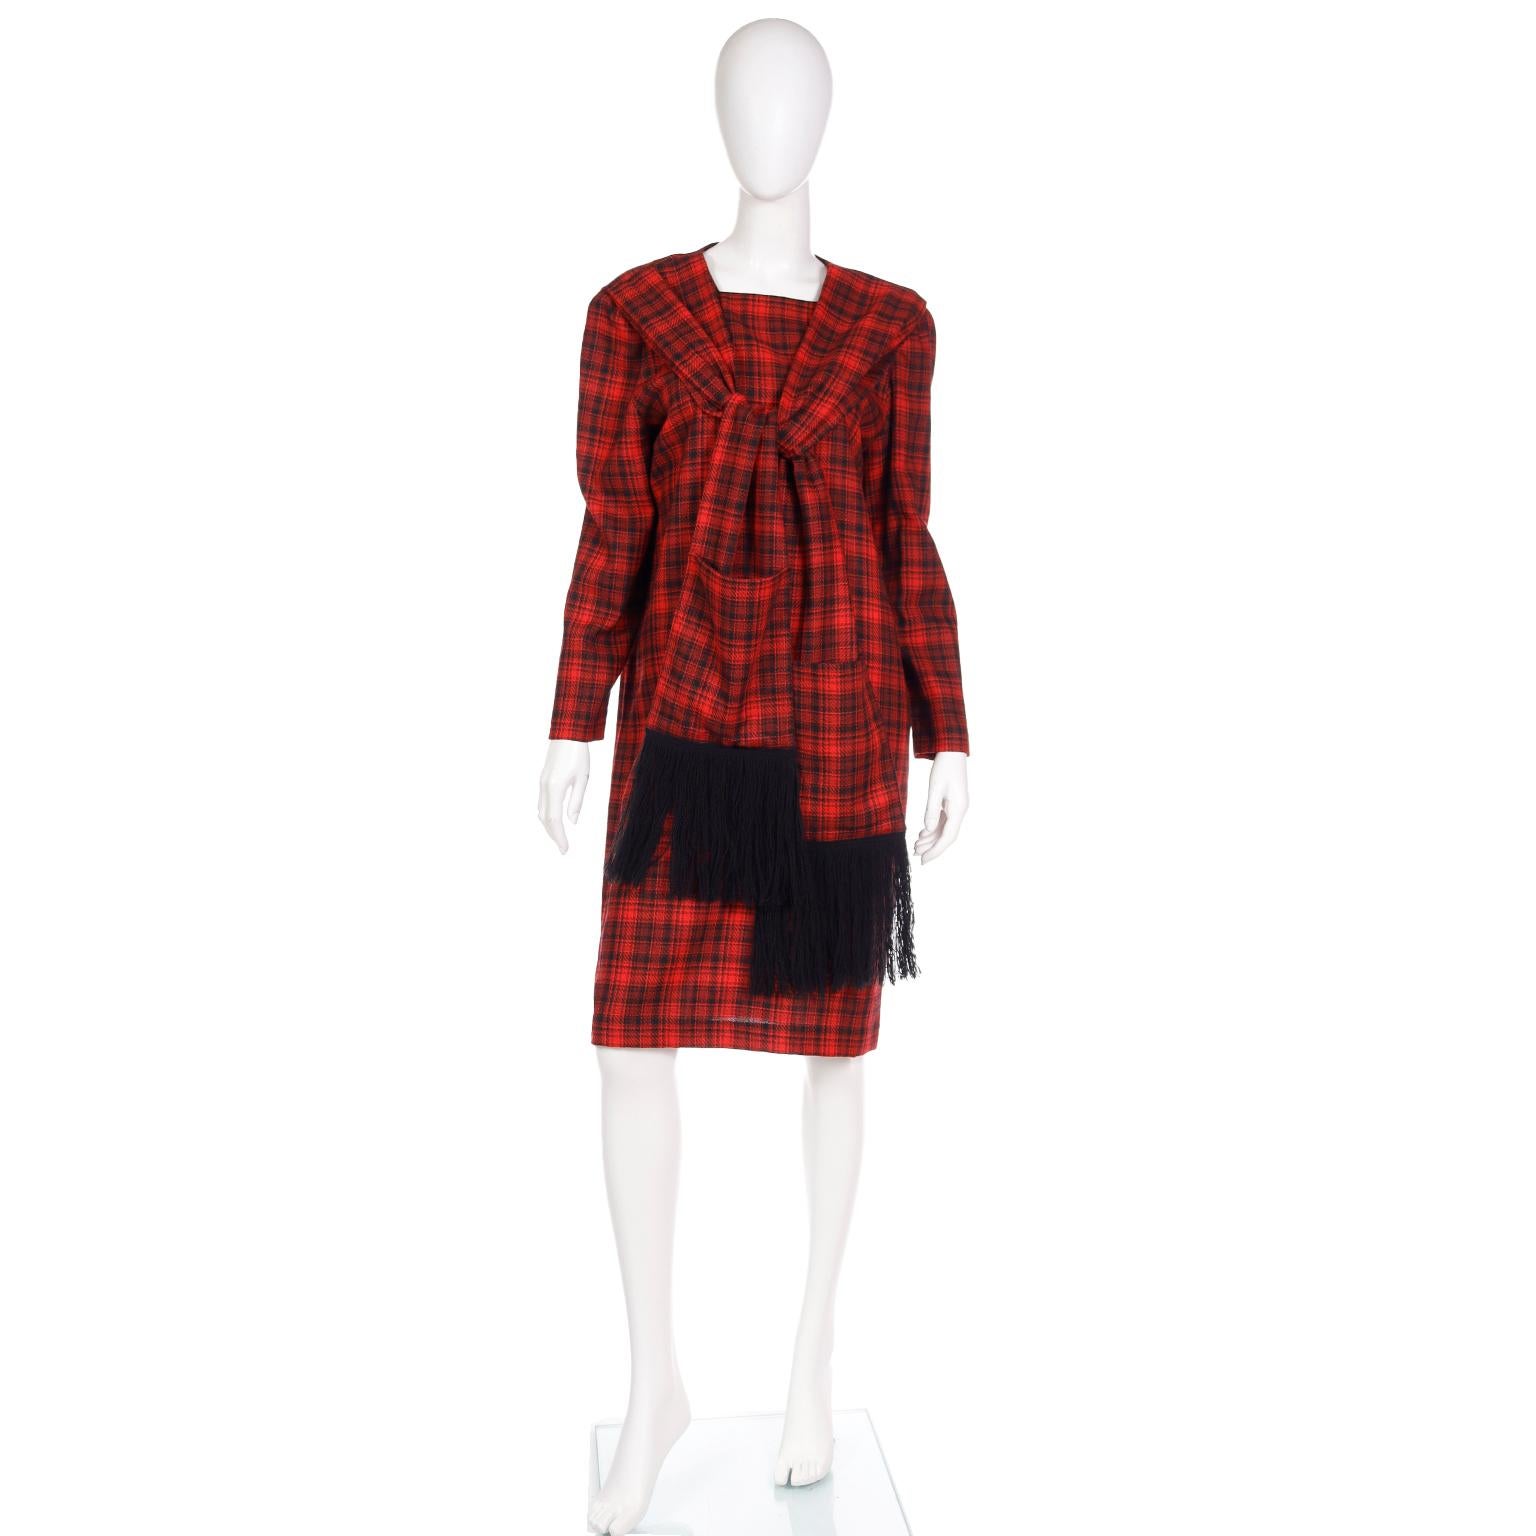 This late 1970's or early 1980's Pierre Cardin red plaid wool long sleeve dress is so unique and very wearable today! The shift silhouette and simple square neck are accentuated with attached panels that mimic a fringed scarf with pockets on each